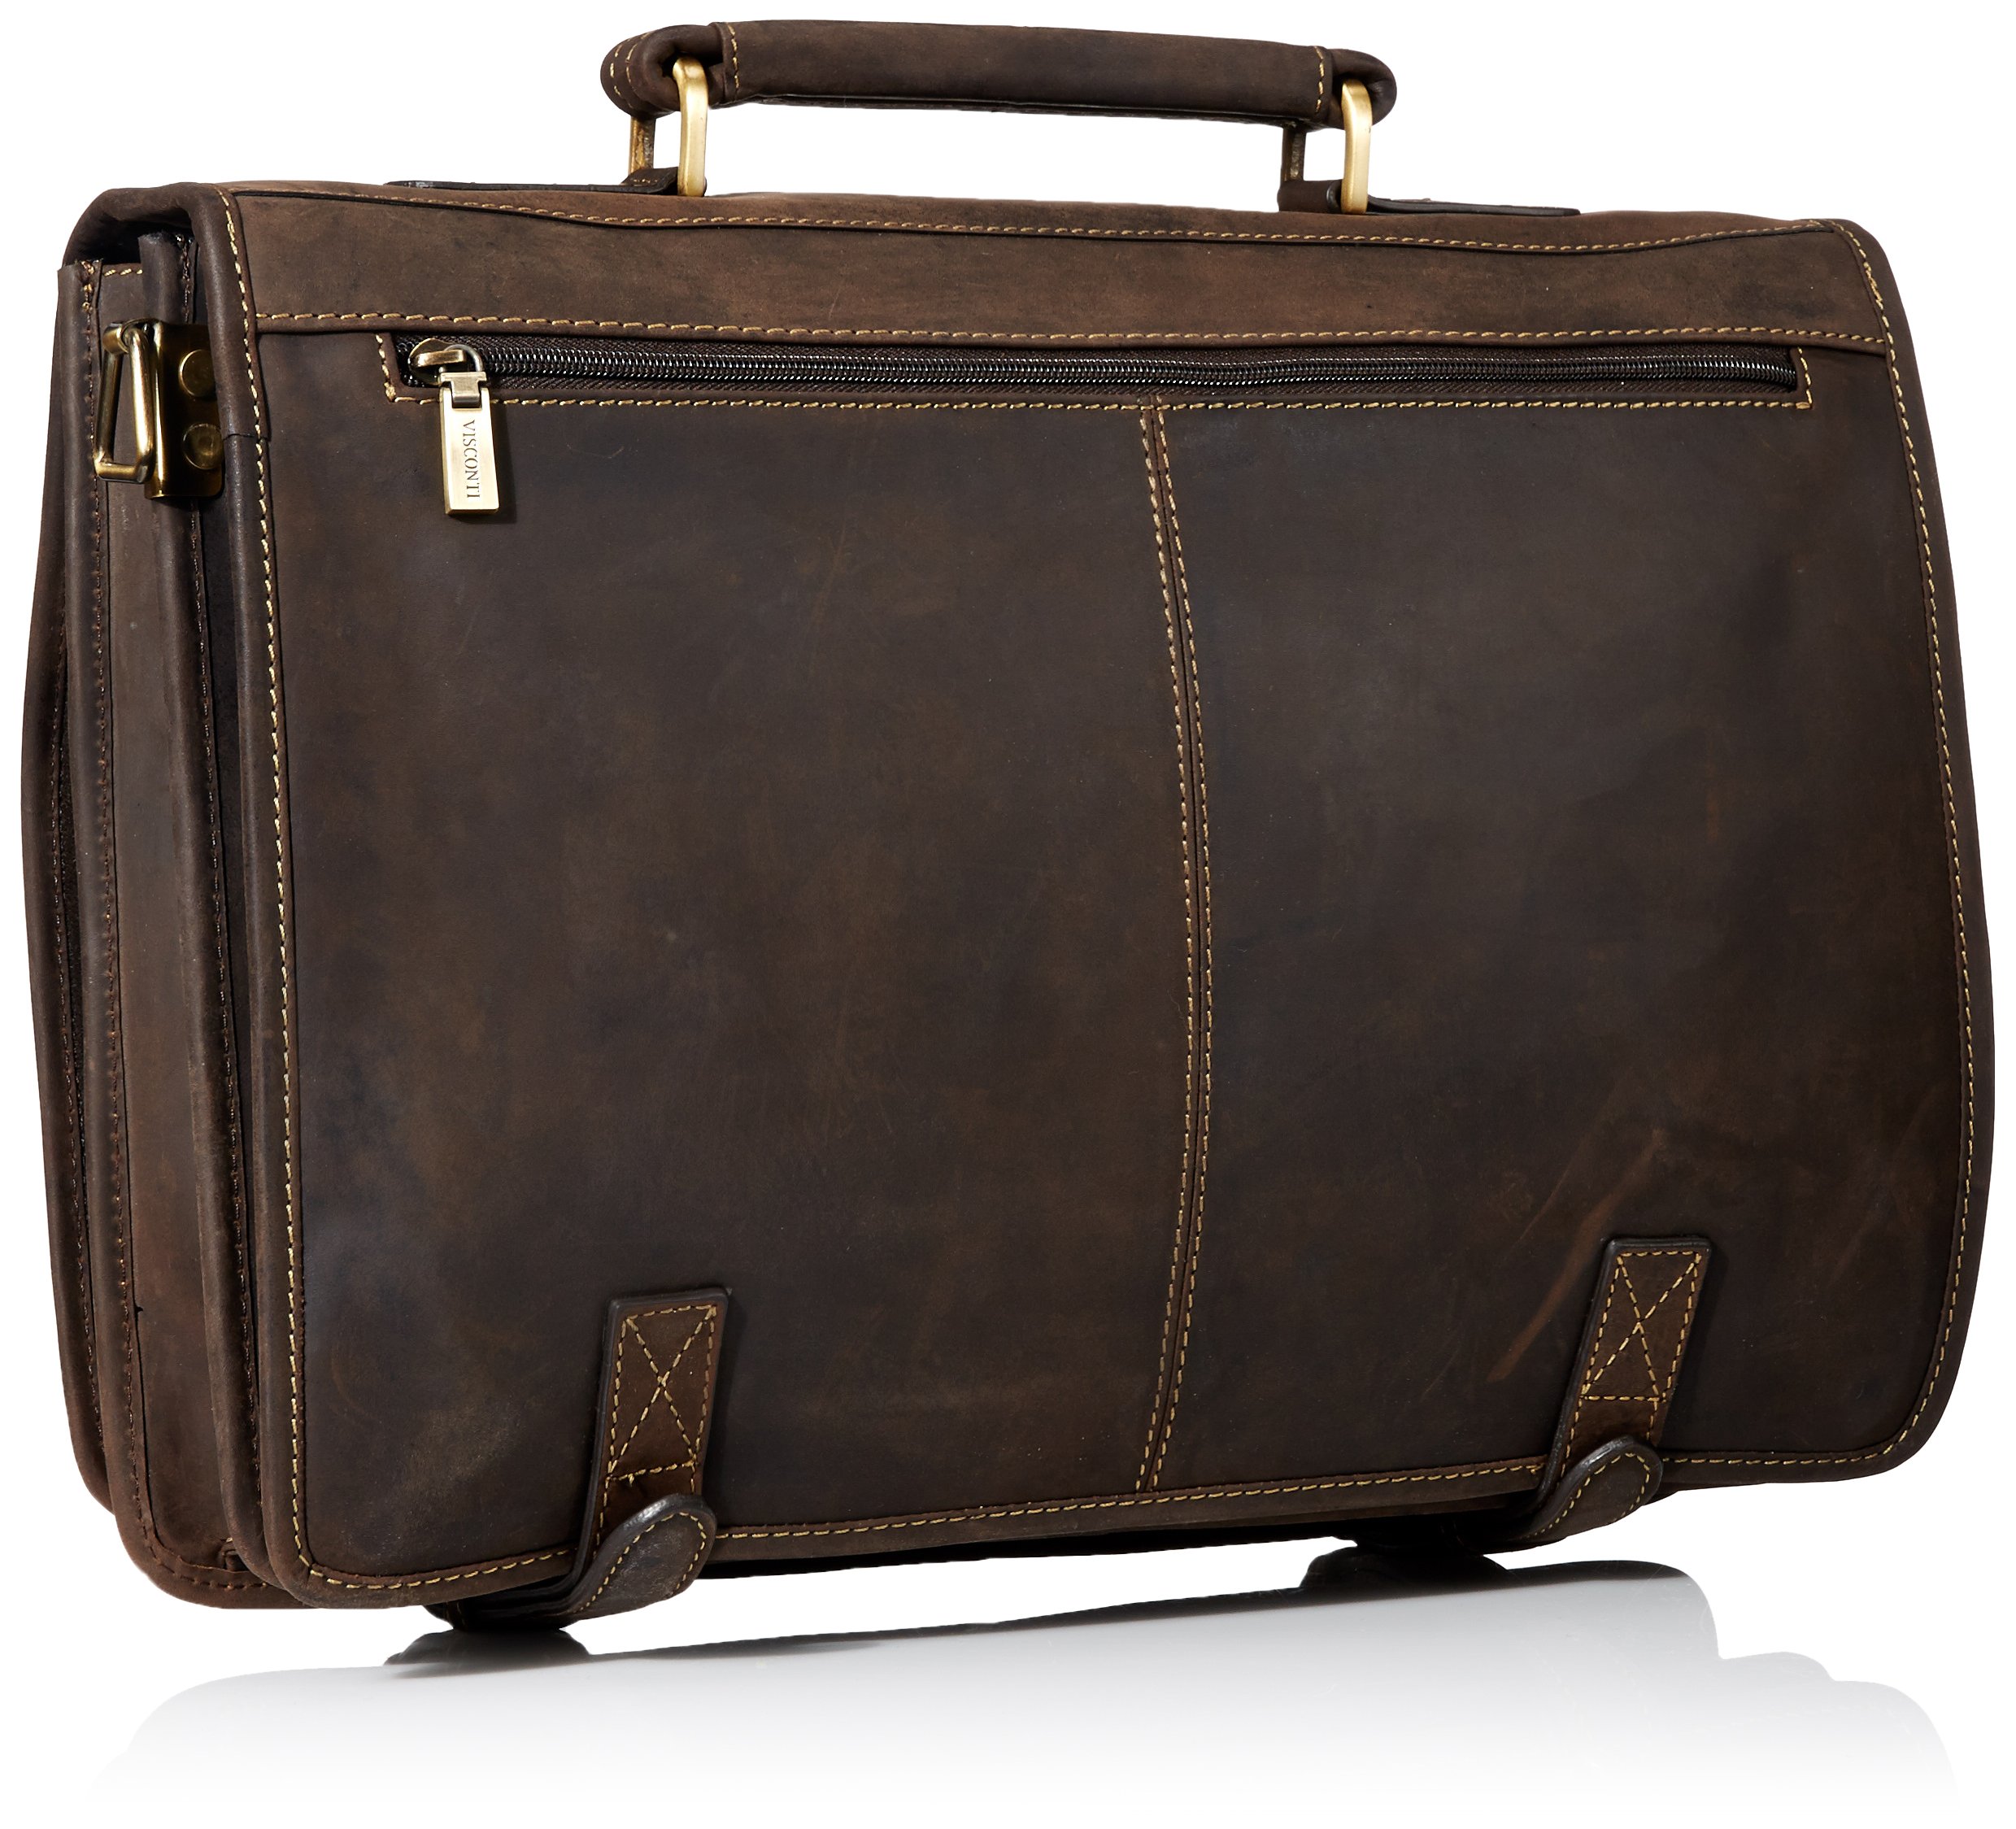 Visconti Hulk Full Flap Business Twin Compartment Briefcase, Brown, One Size